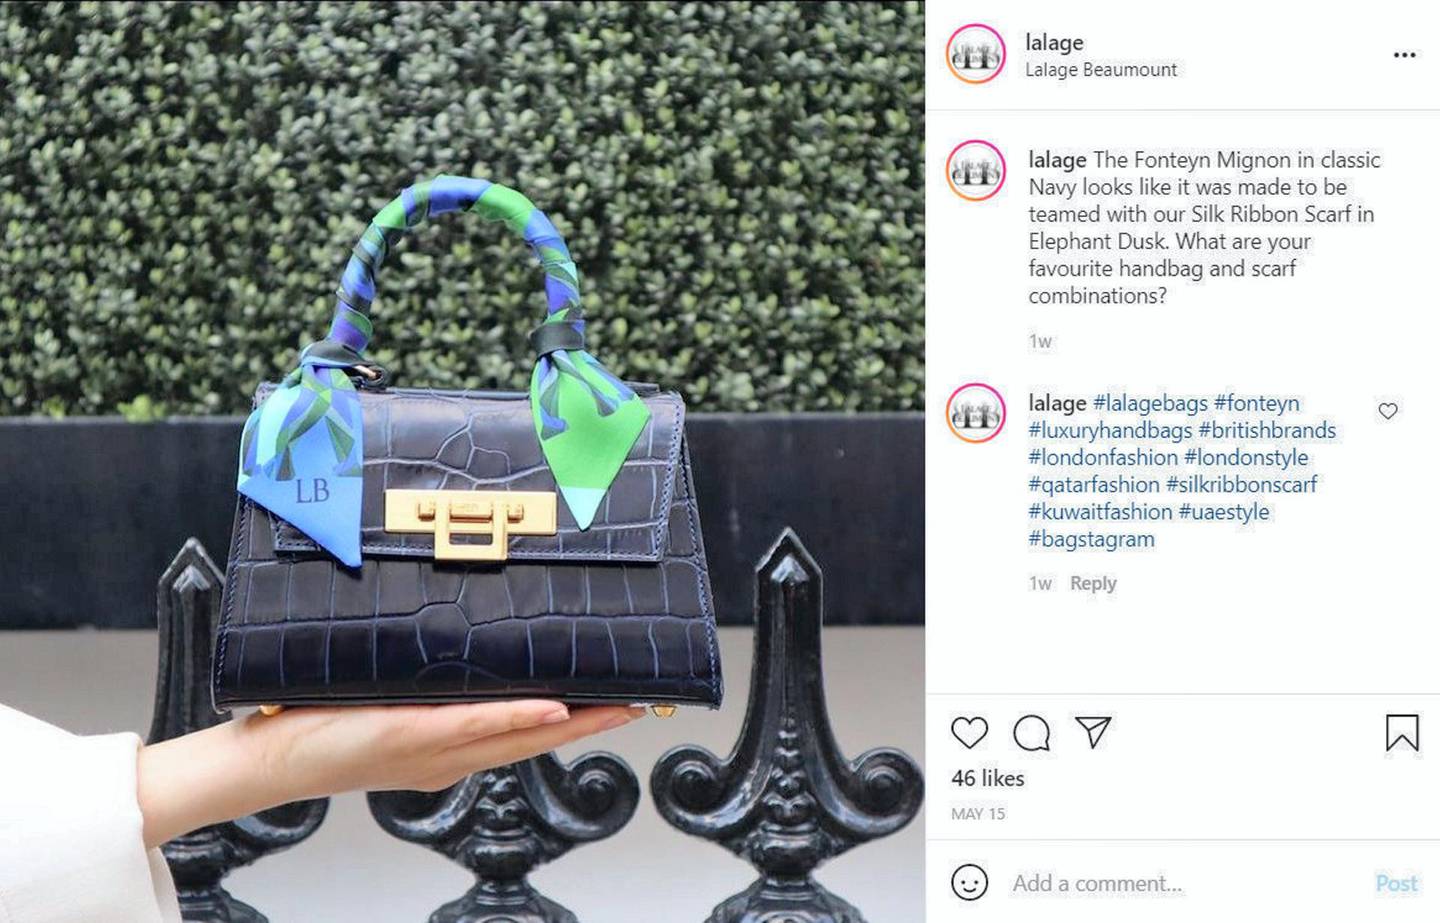 An Instagram post by Lalage Beaumont using a '#uaestyle' hashtag. Lalage Beaumont/Instagram